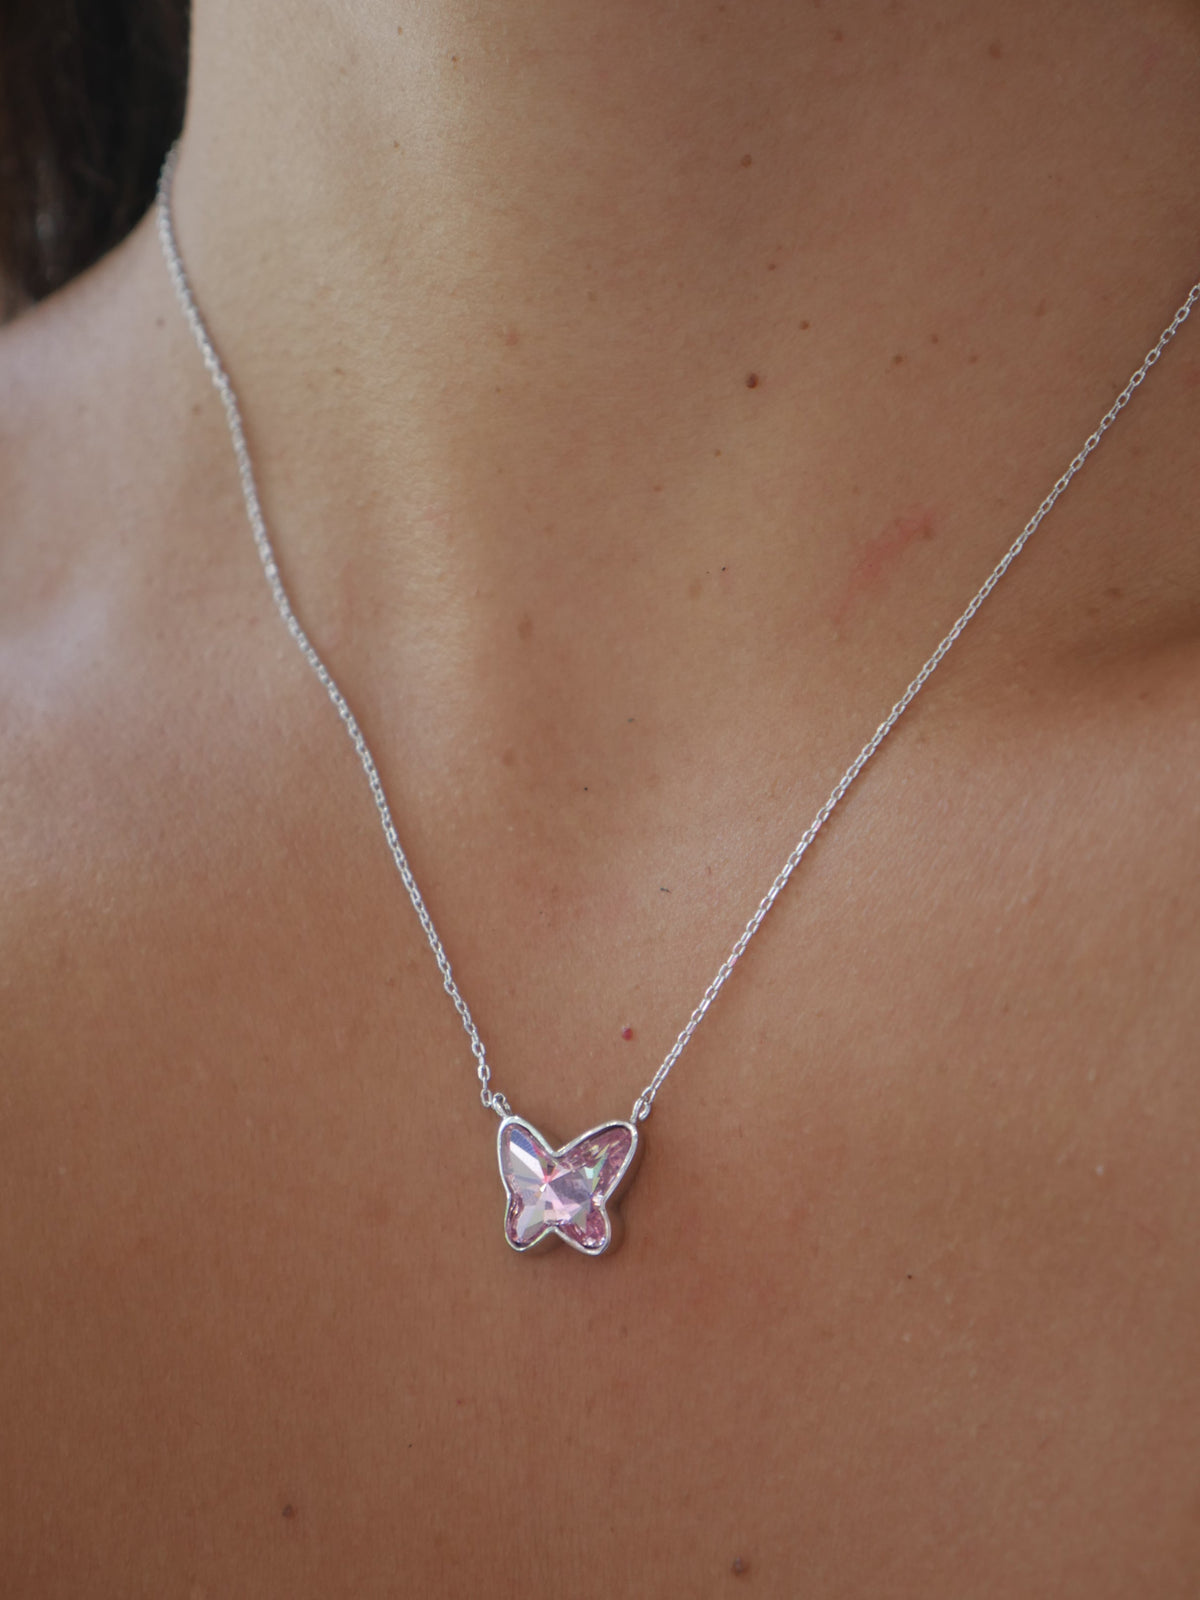 necklaces, butterfly necklaces, pink butterfly necklaces, black rhinestone necklaces, swarovski crystal necklaces, australian crystal necklaces, barbie jewelry and accessories , nickel free, waterproof jewelry that wont tarnish or turn green, popular necklaces, .925 stelring silver, dainty jewelry, graduation gift, anniversary gift, best friend necklaces, going out jewelry, tiktok brands, pink butterfly necklaces